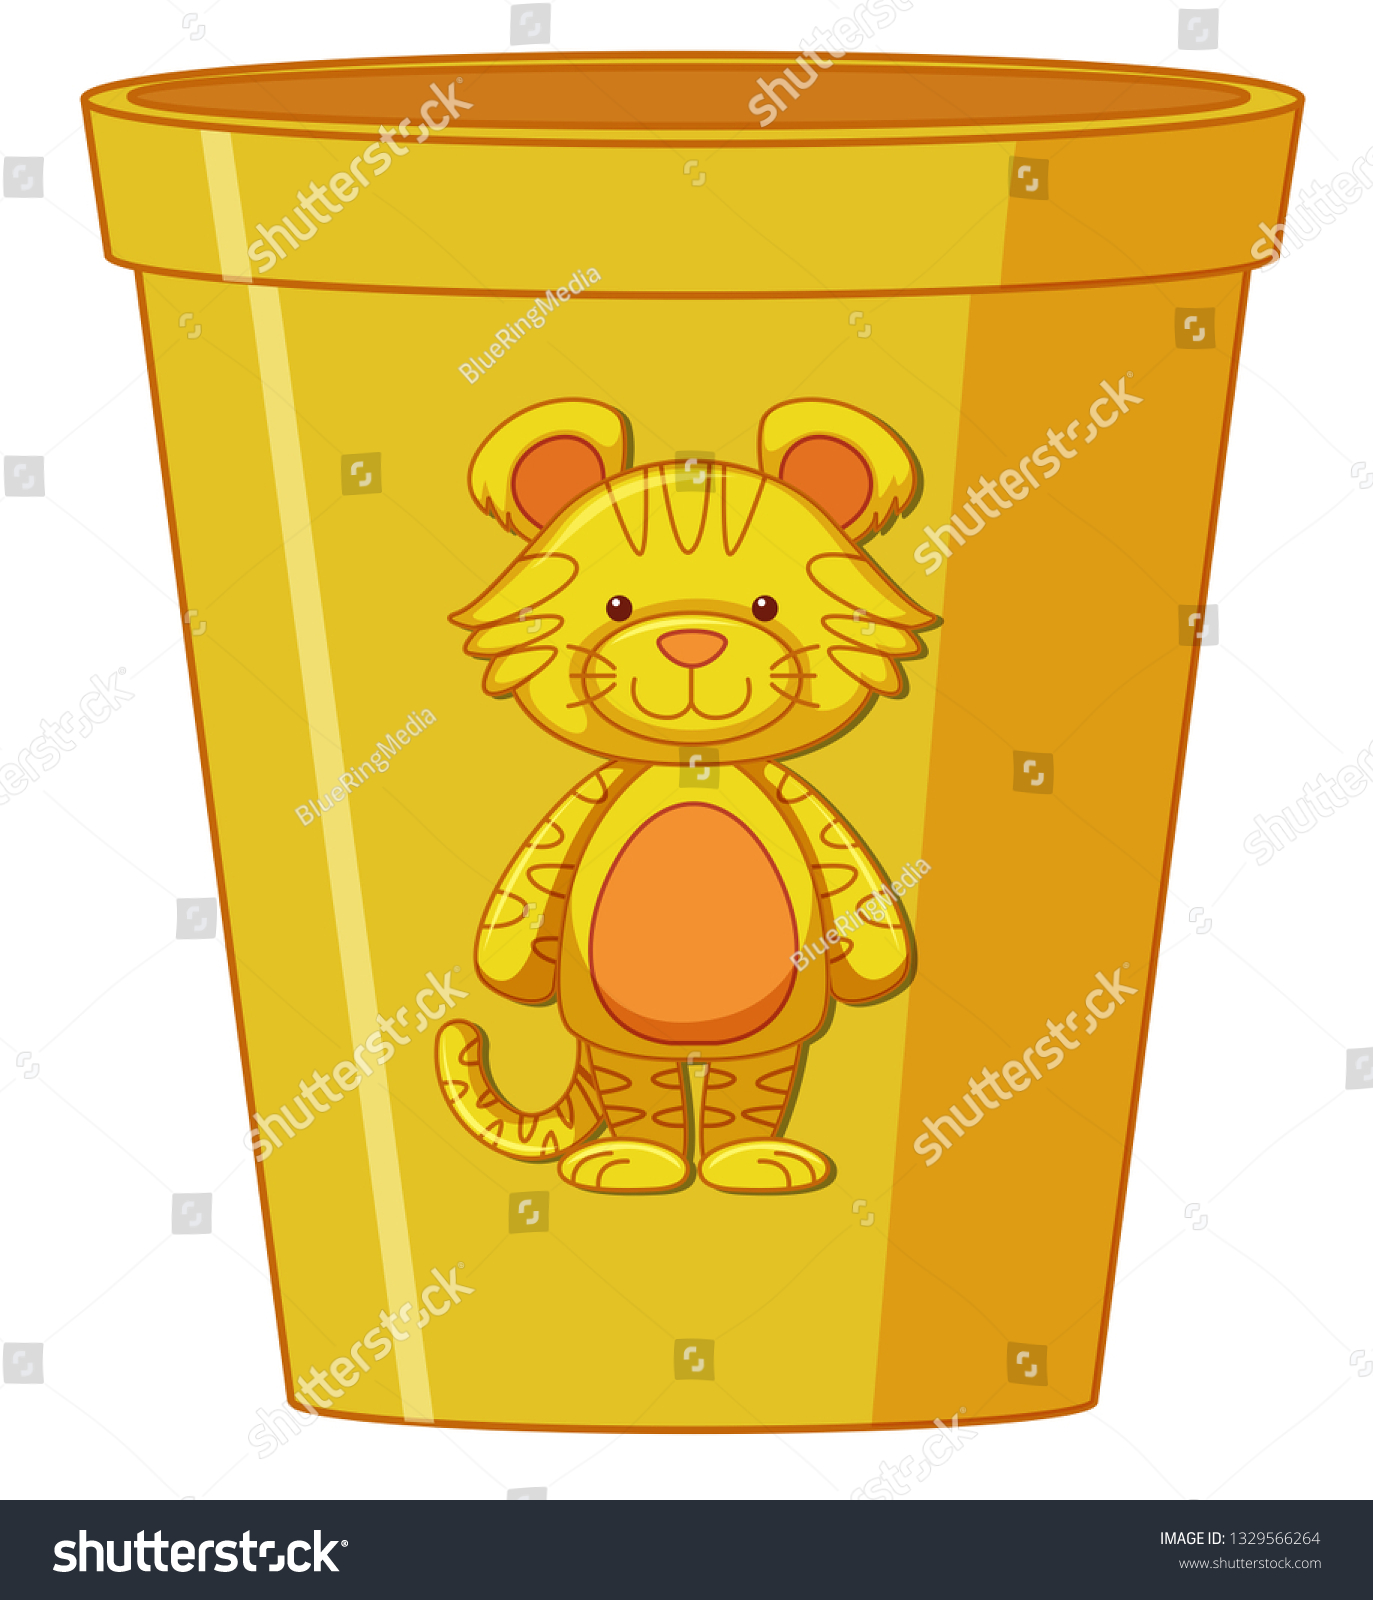 Download Yellow Plastic Cup Illustration Stock Vector Royalty Free 1329566264 Yellowimages Mockups